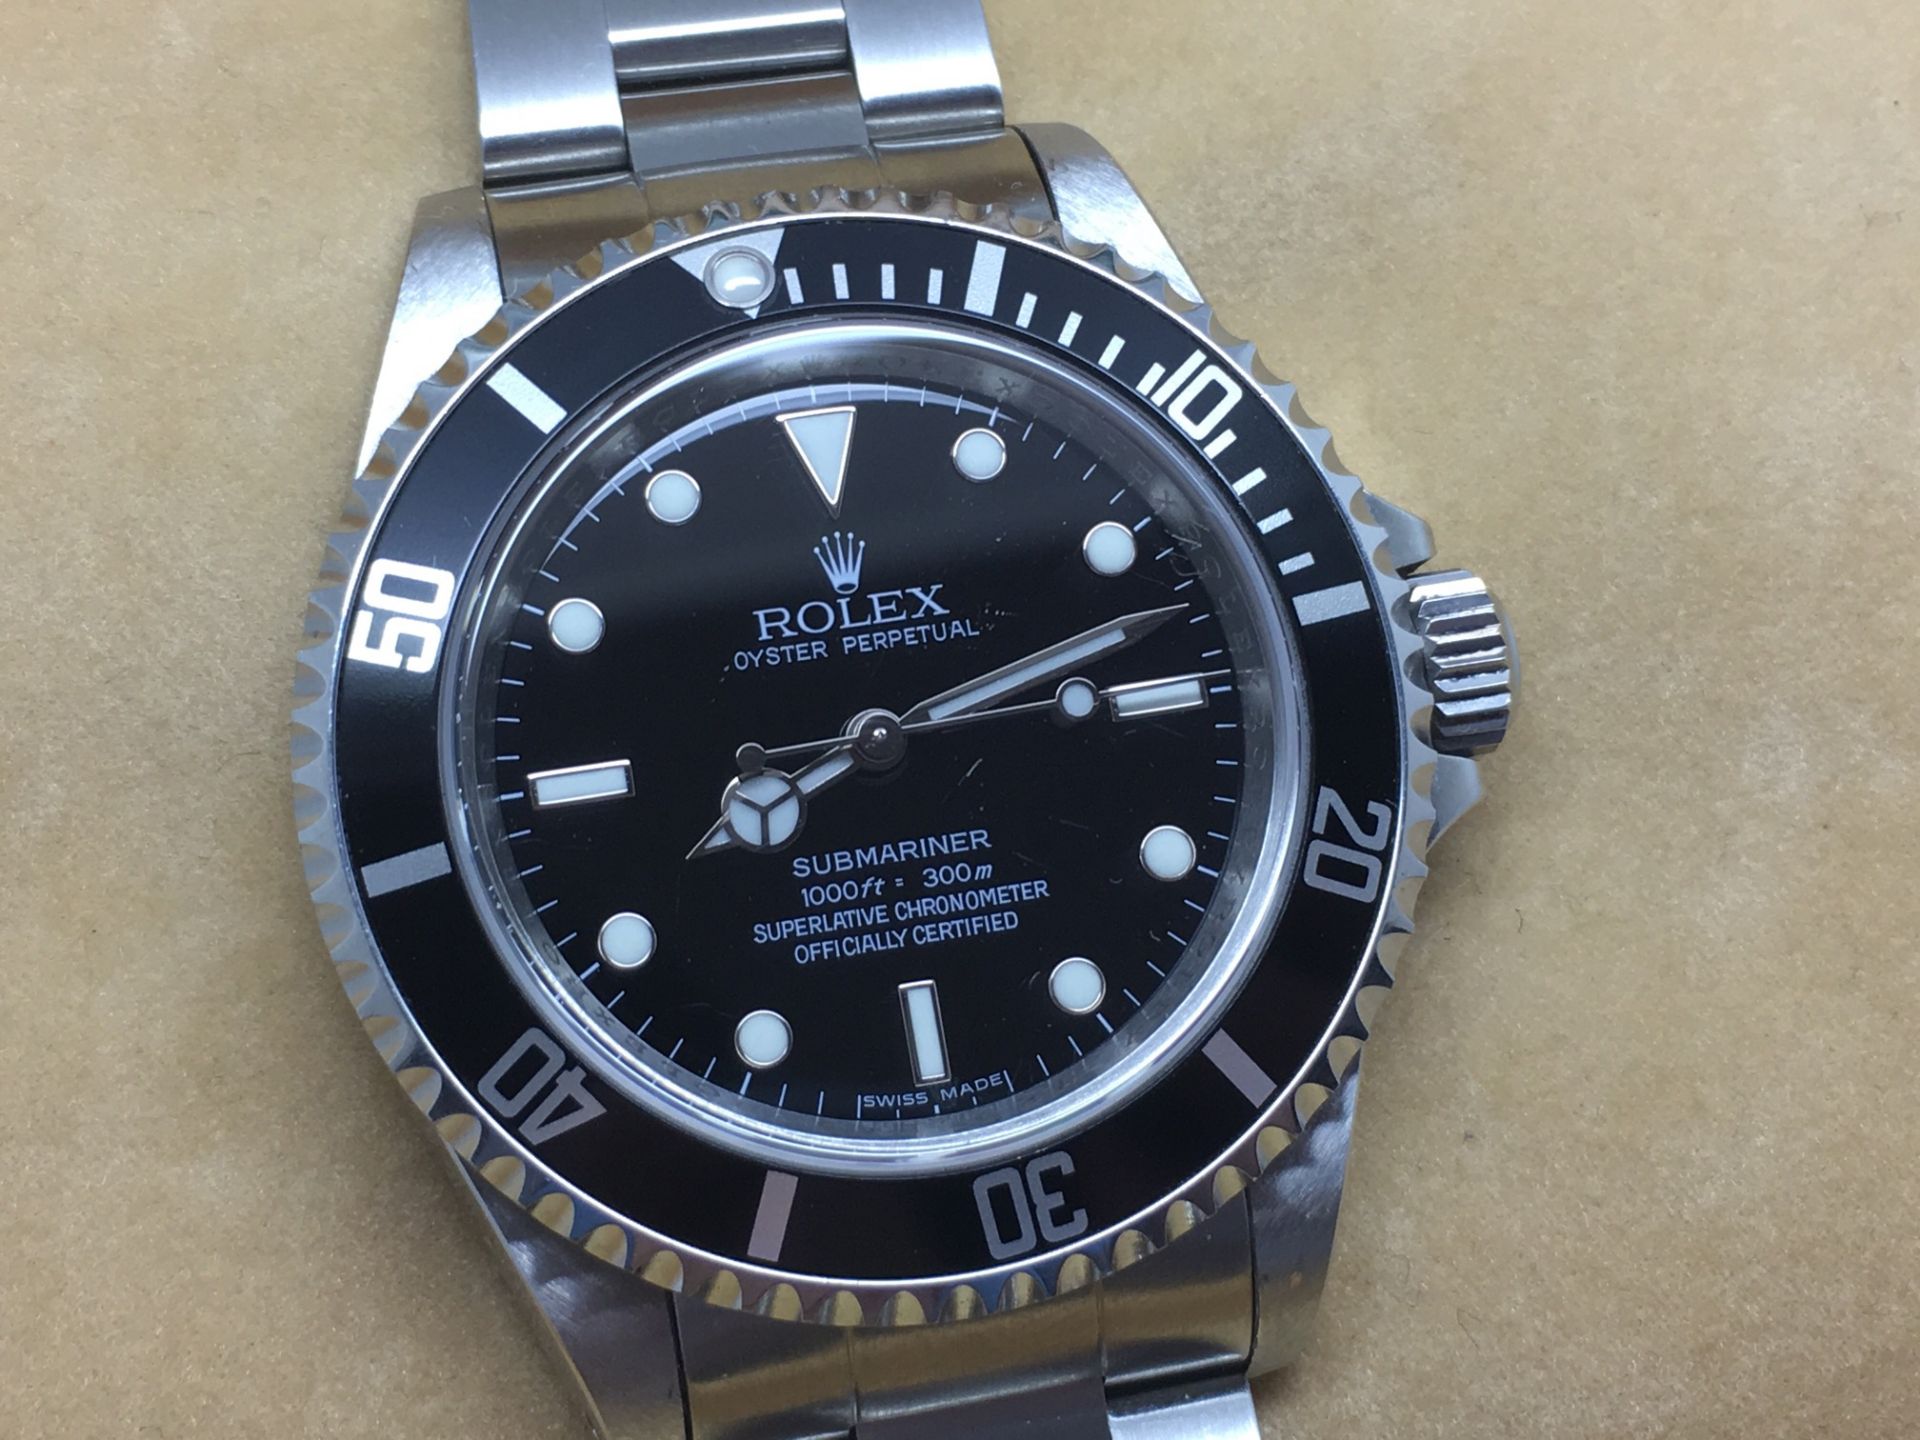 ROLEX OYSTER SUBMARINER WATCH - DATES TO APPROX 2008/09